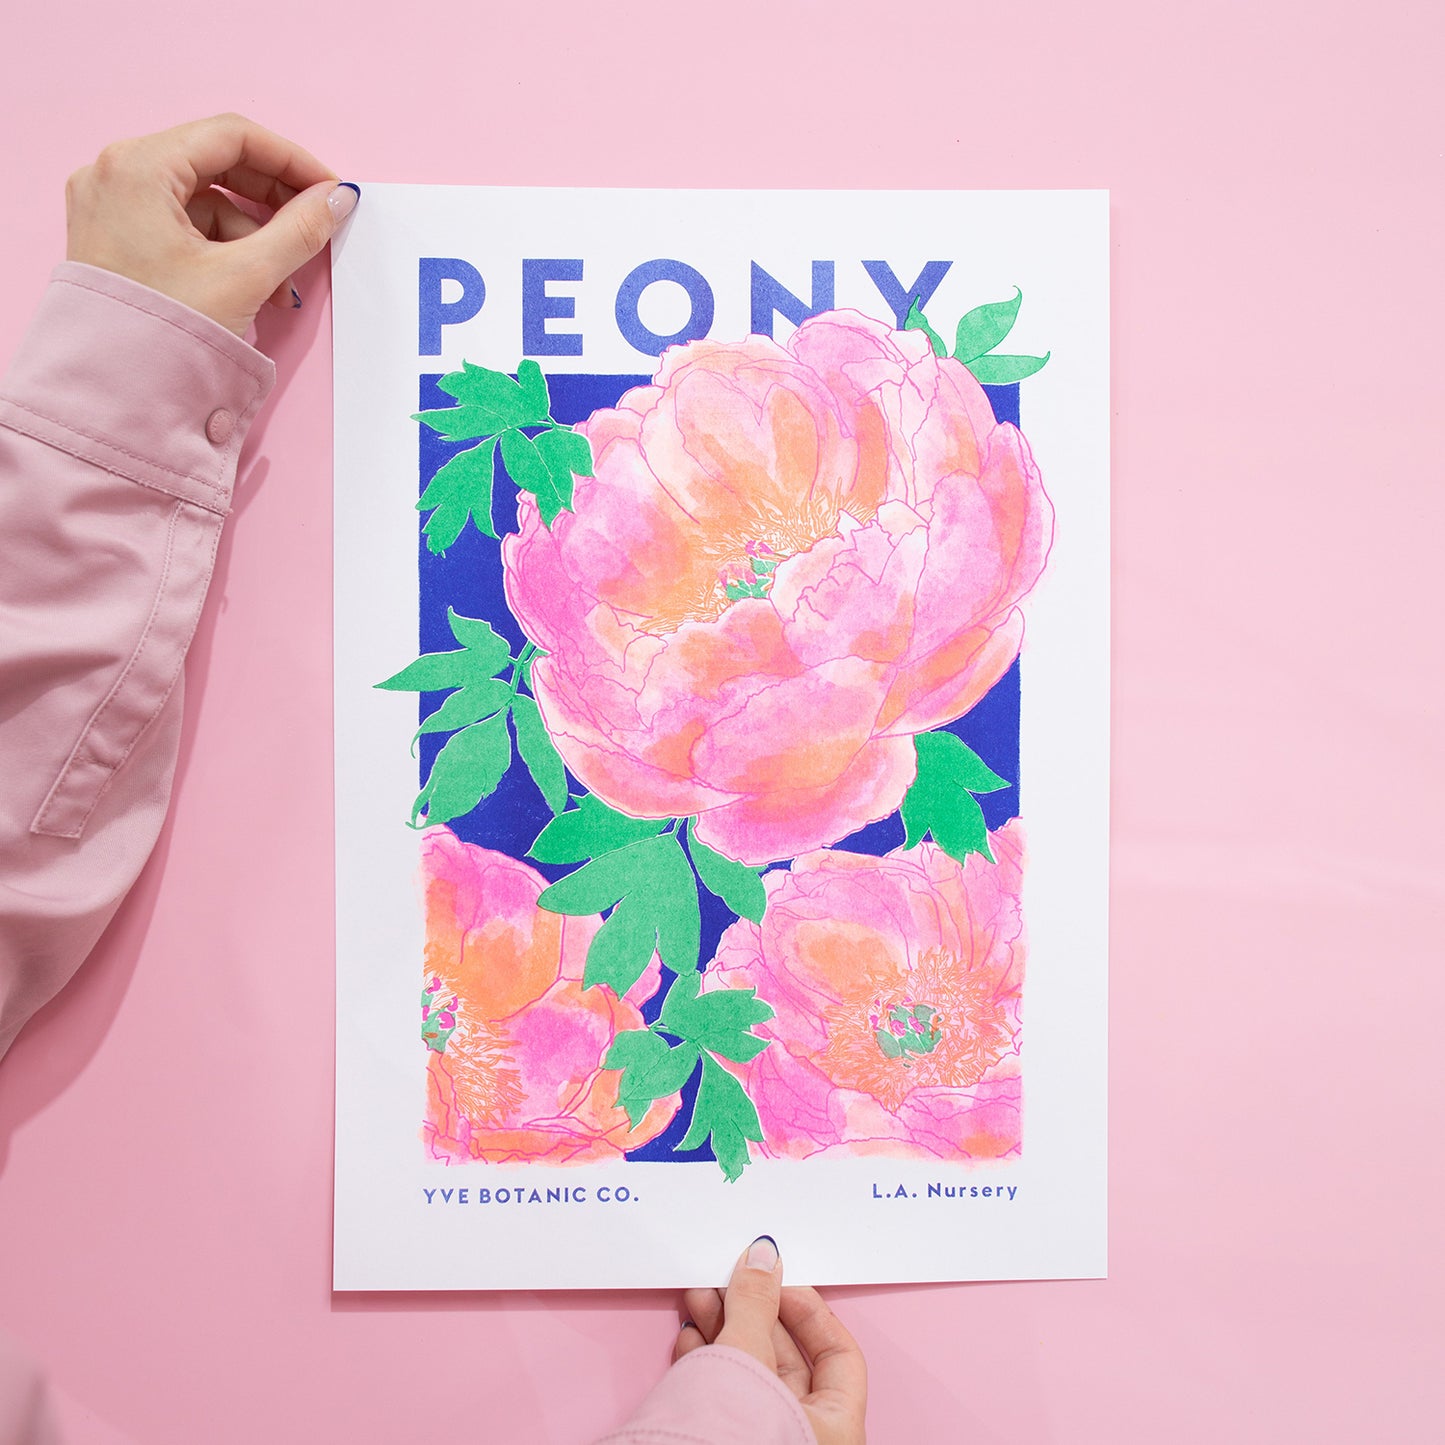 A person holding a print featuring an illustration of a Peony flower - pink background